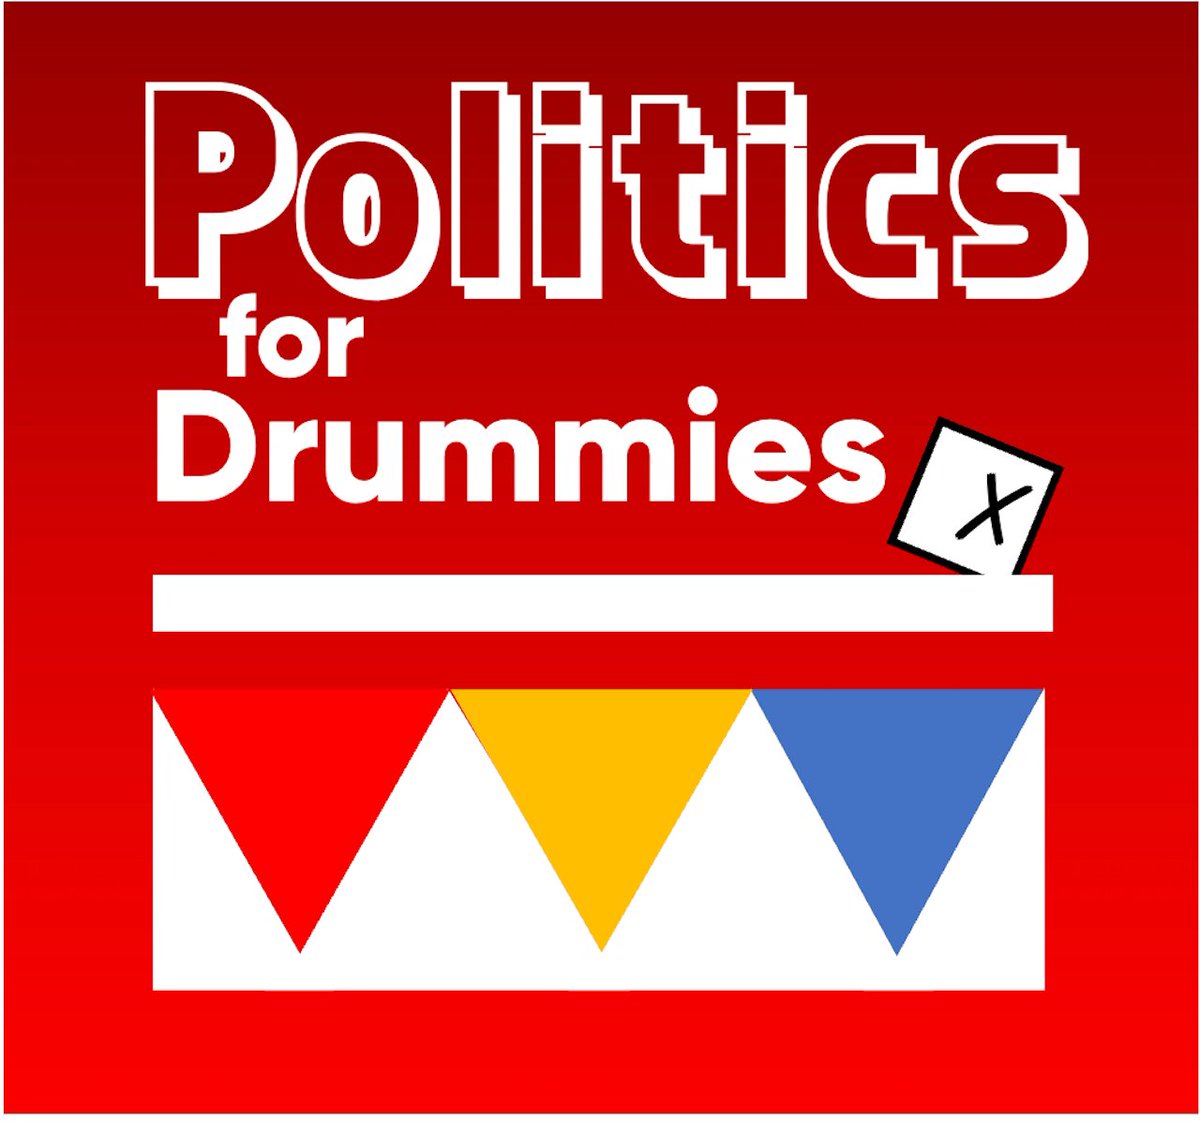 Listen to ‘Politics for Drummies’, a new podcast dissecting democracy-shaping marketing dlvr.it/T0tRfc #Marketing #Advertising